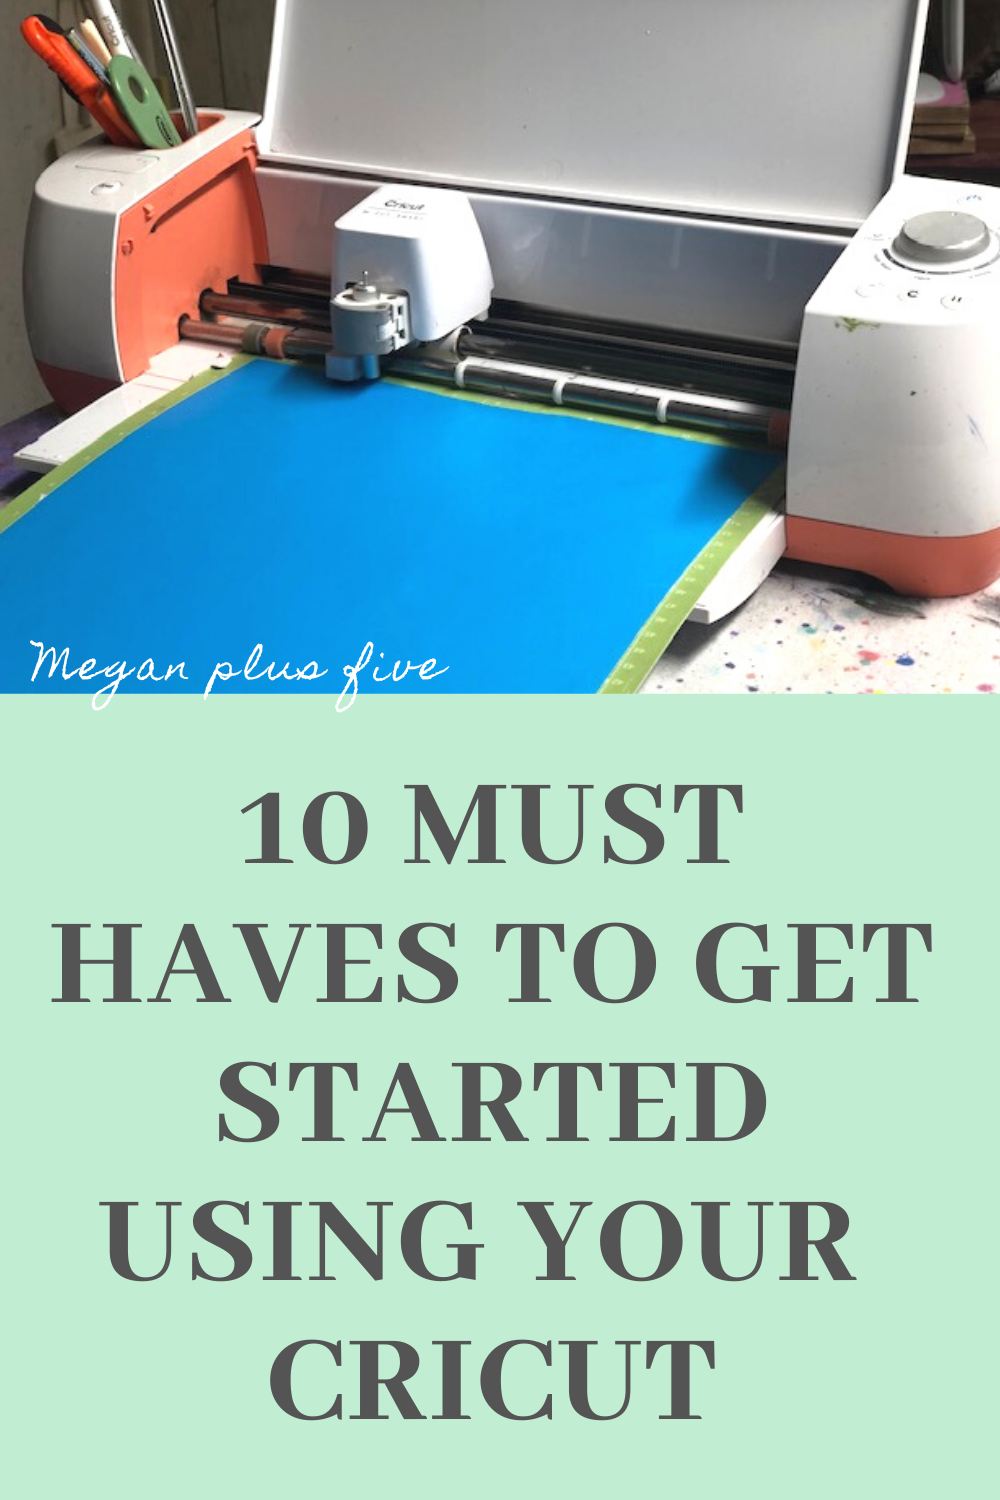 10 must haves to get started using your cricut. What you should buy when you are just starting out using your Cricut cutting machine. Tips to using a Cricut when you are new to vinyl cutting.